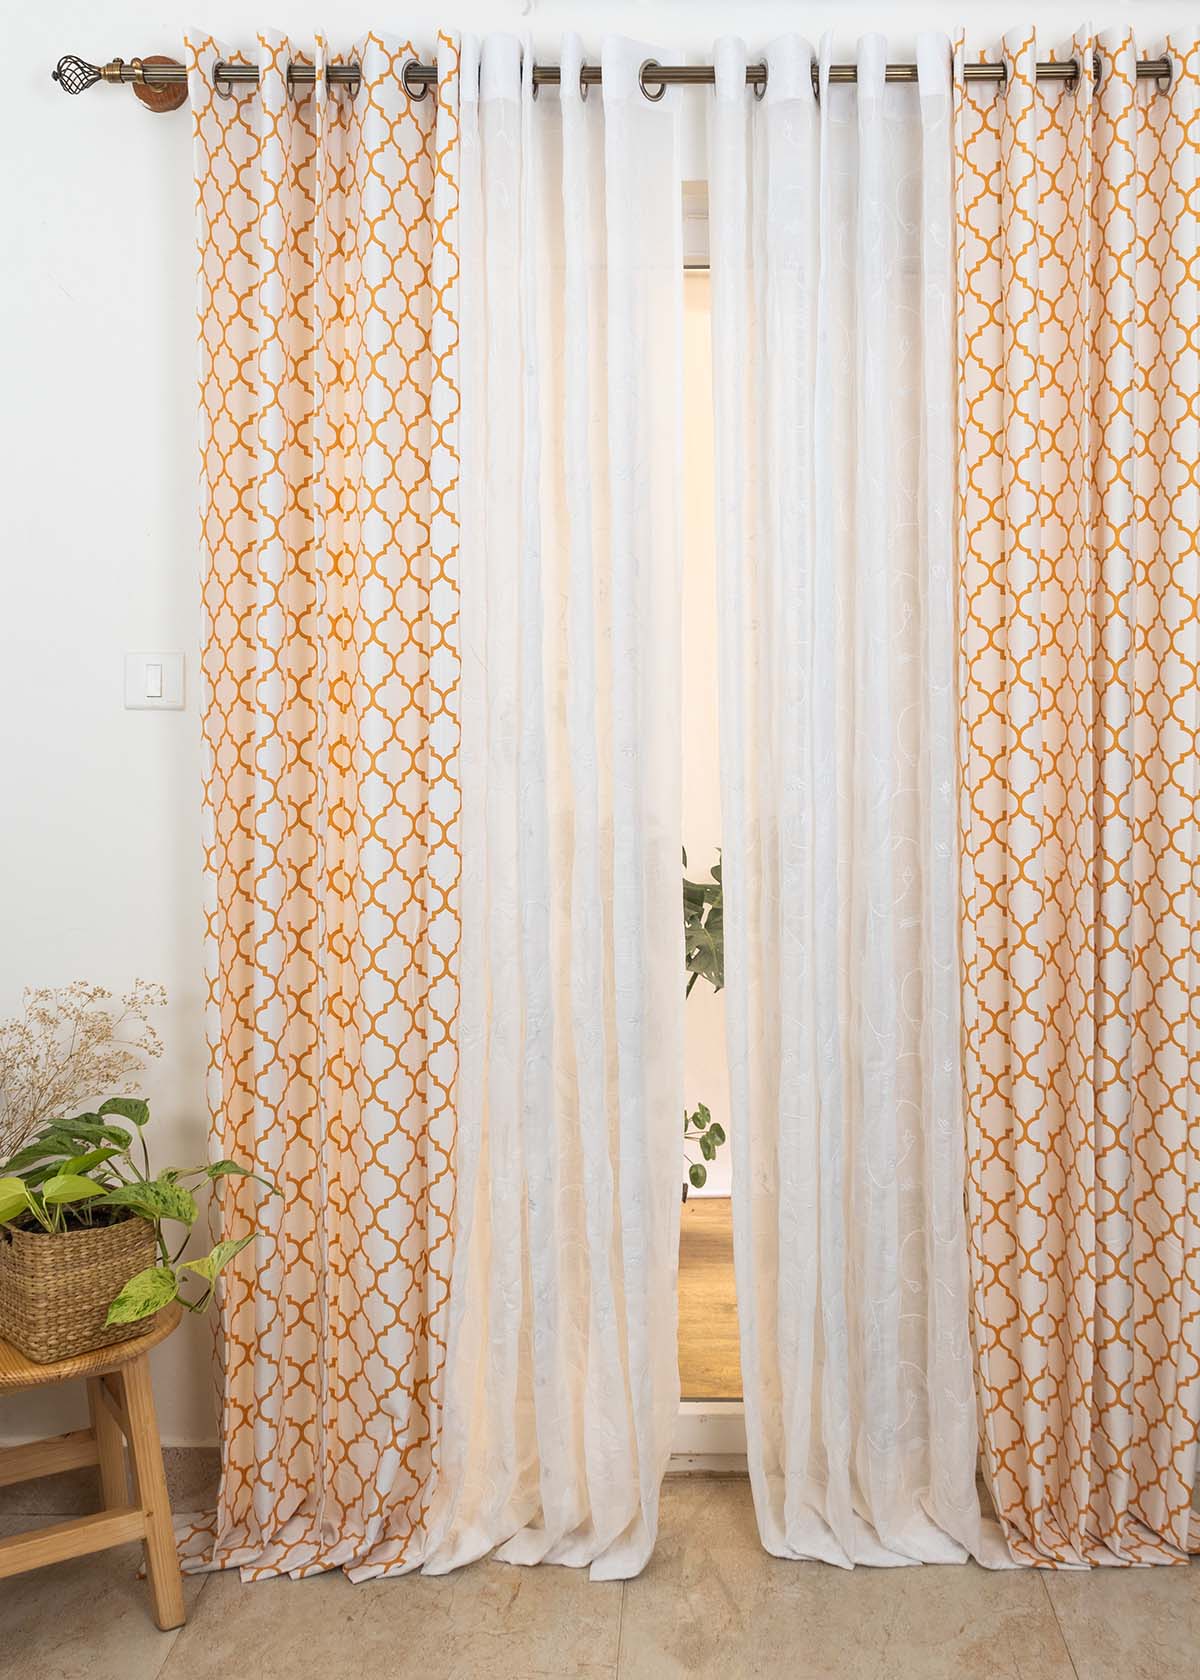 Trellis Mustard, Ivy Vines Embroidered Sheer Set Of 4 Combo Cotton Curtain - Mustard, White